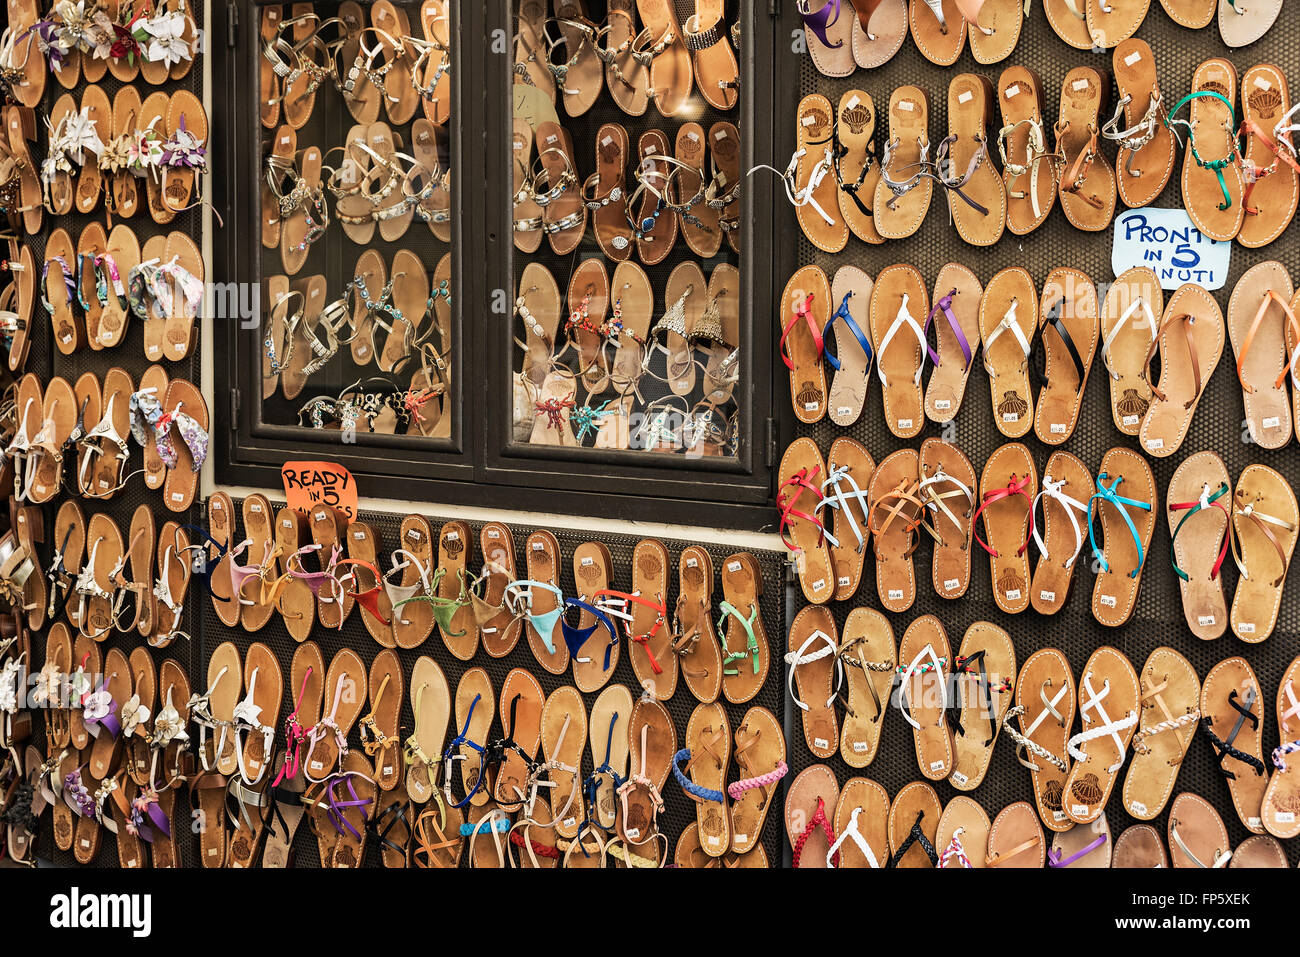 Sandals on display at vendor shop, Sorrento, Italy Stock Photo